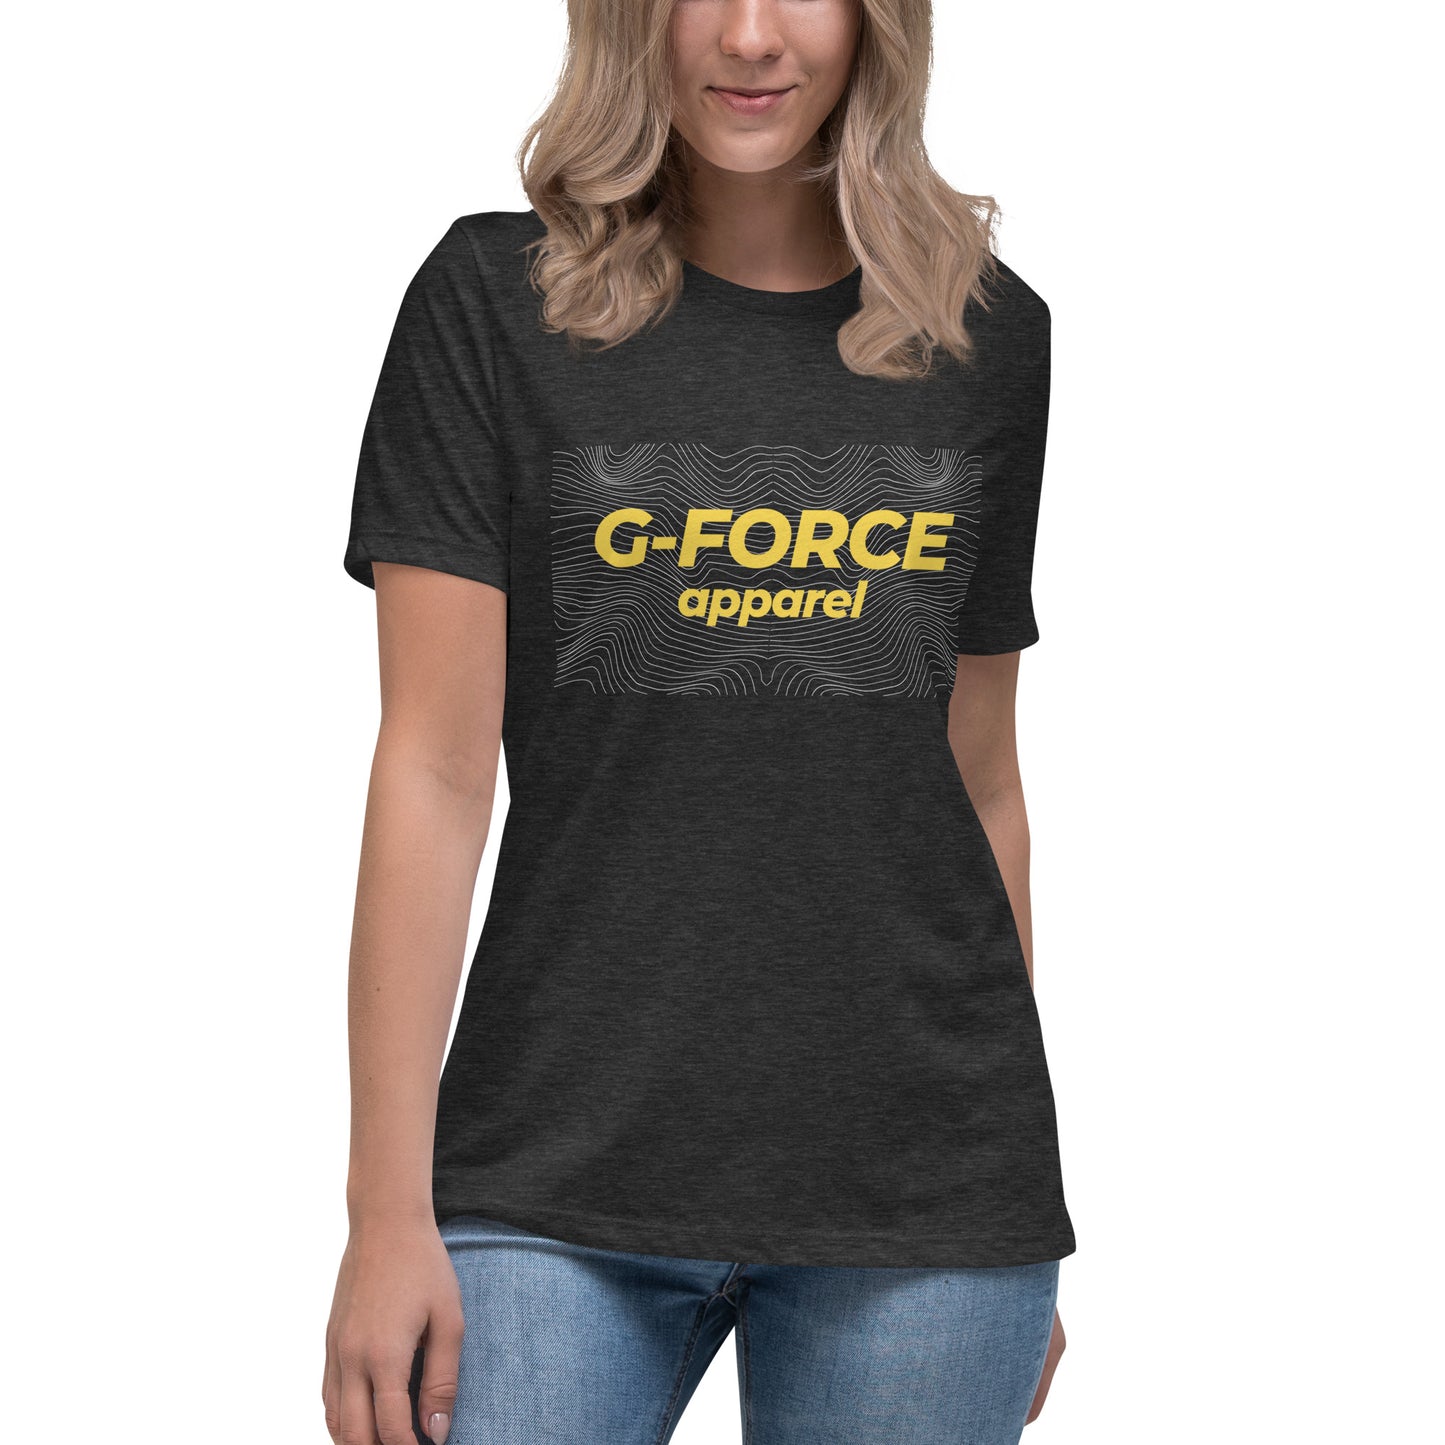 G-FORCE APPAREL wave Tee